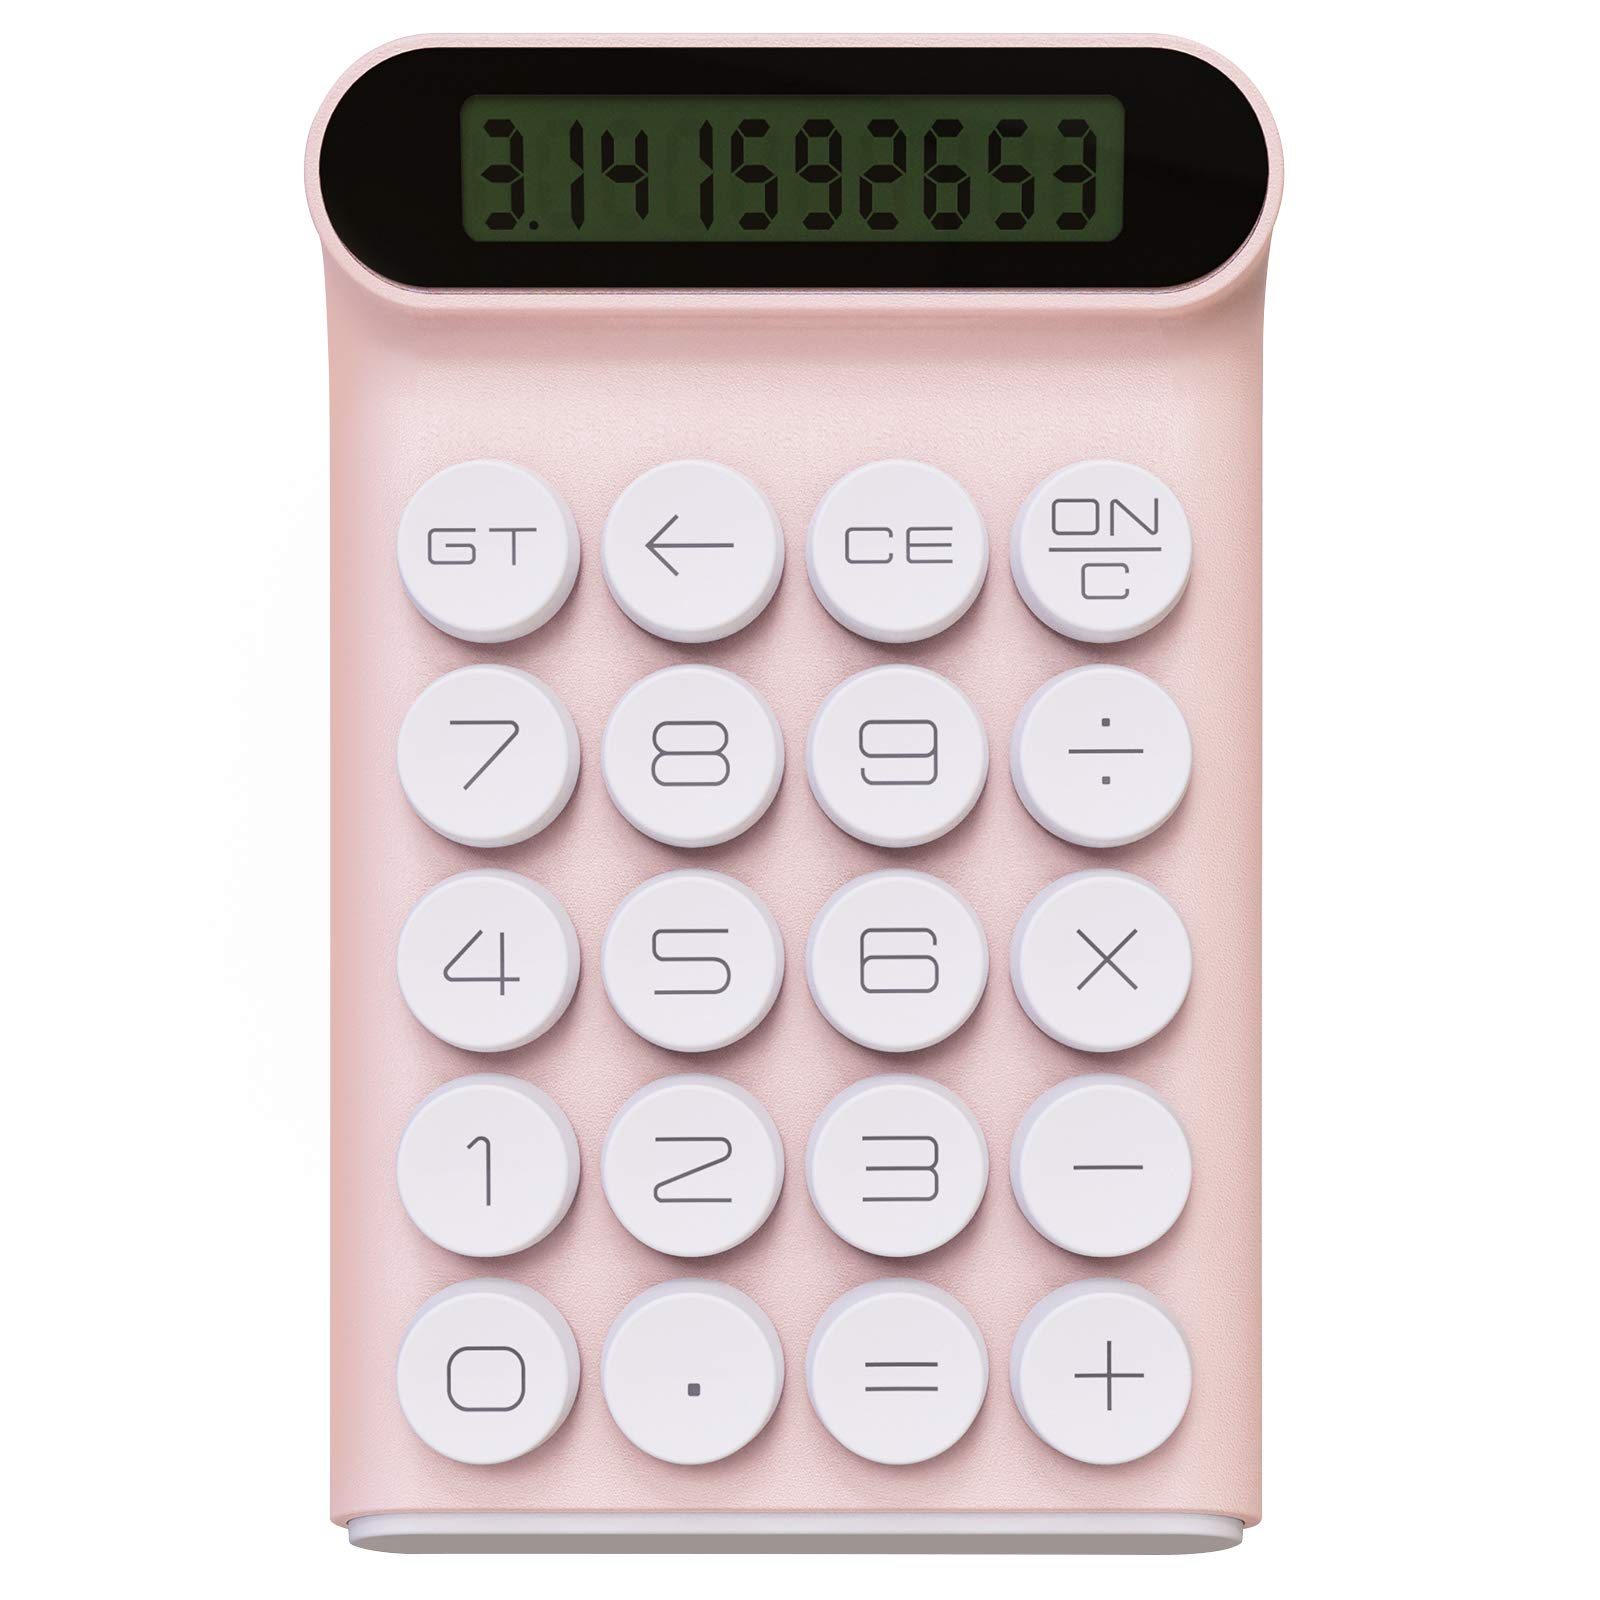 Mechanical Switch Calculator,Handheld for Daily and Basic Office,10 Digit Large LCD Display (Pink)